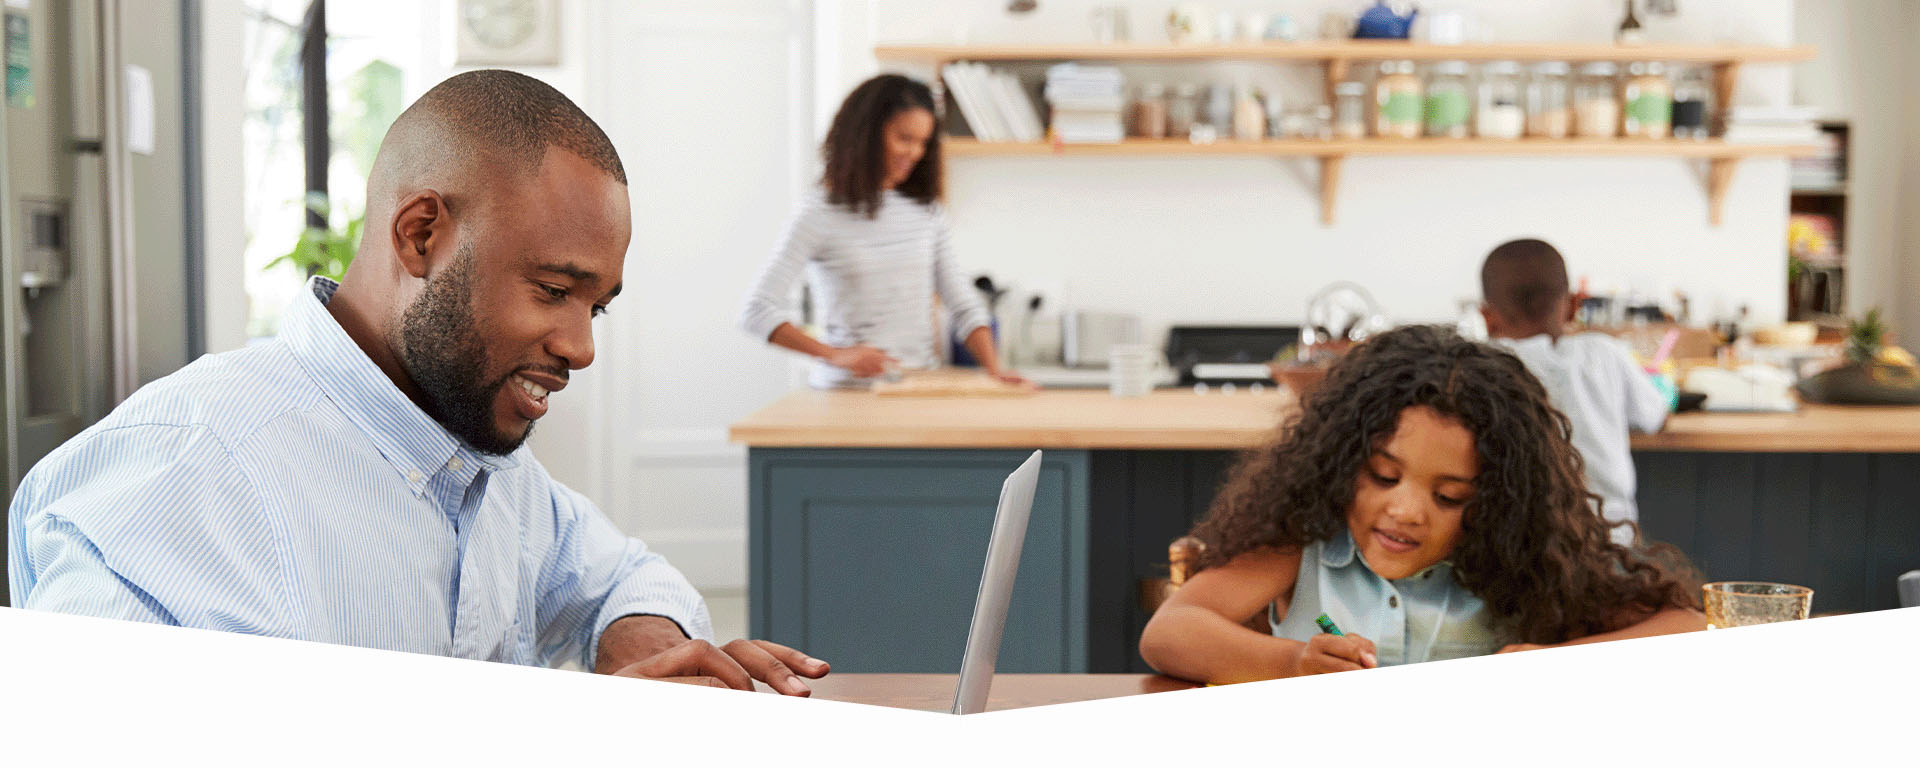 A young black family in the kitchen. Dad is working on his laptop. The daughter is coloring next to him at the table. Mother and son work on something at the kitchen island.